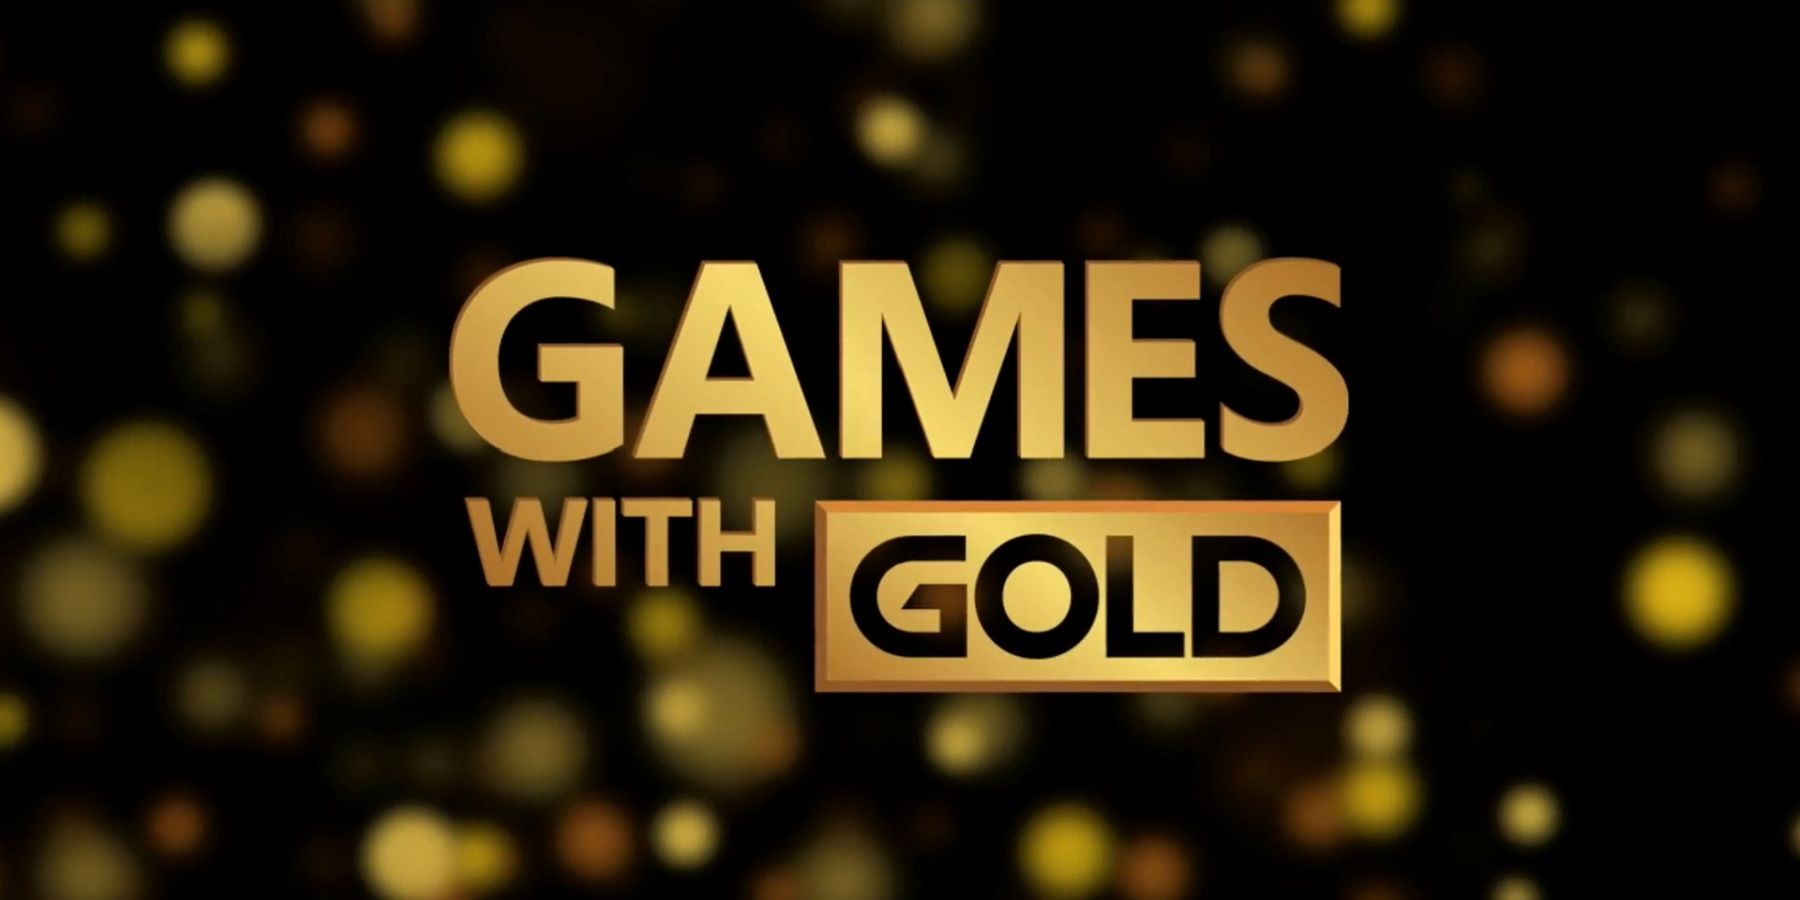 games-with-gold-logo-1